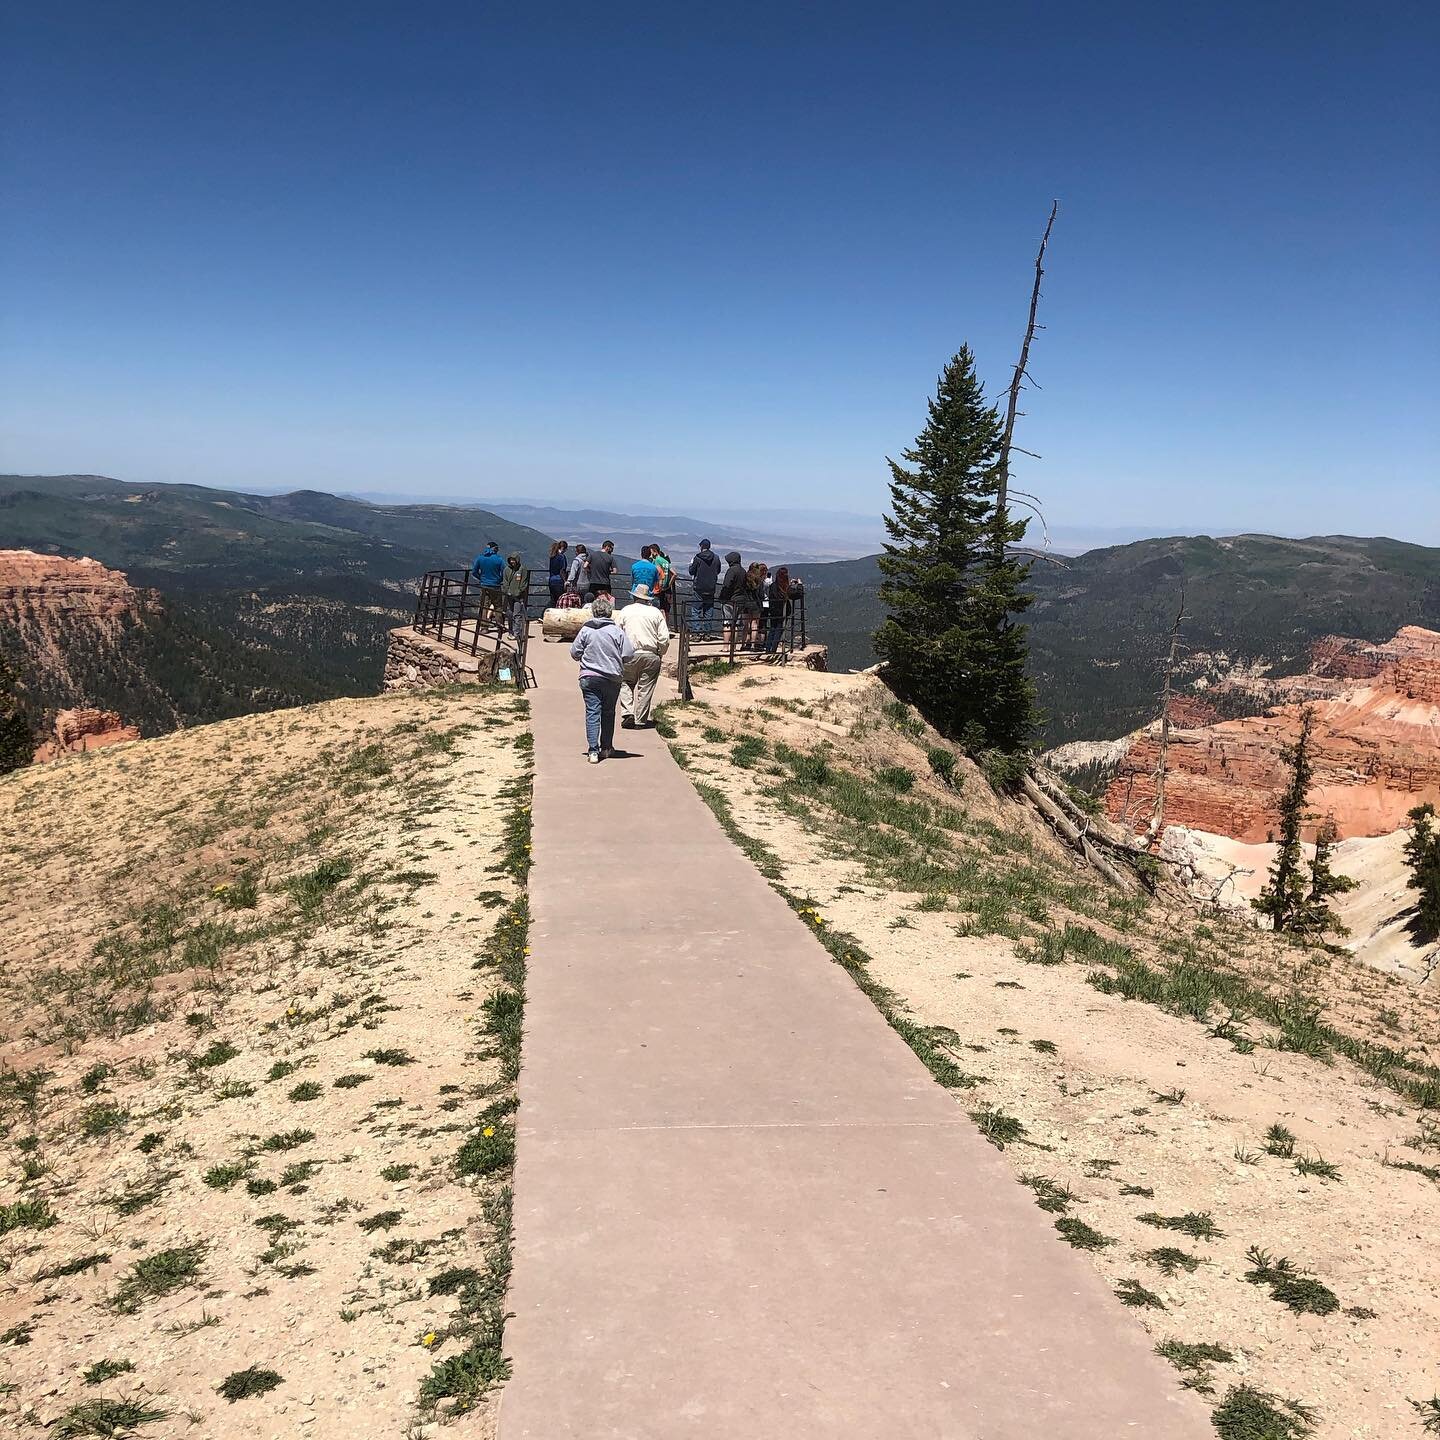 Some amazing views at Cedar Breaks...the Sunset View Overlook.